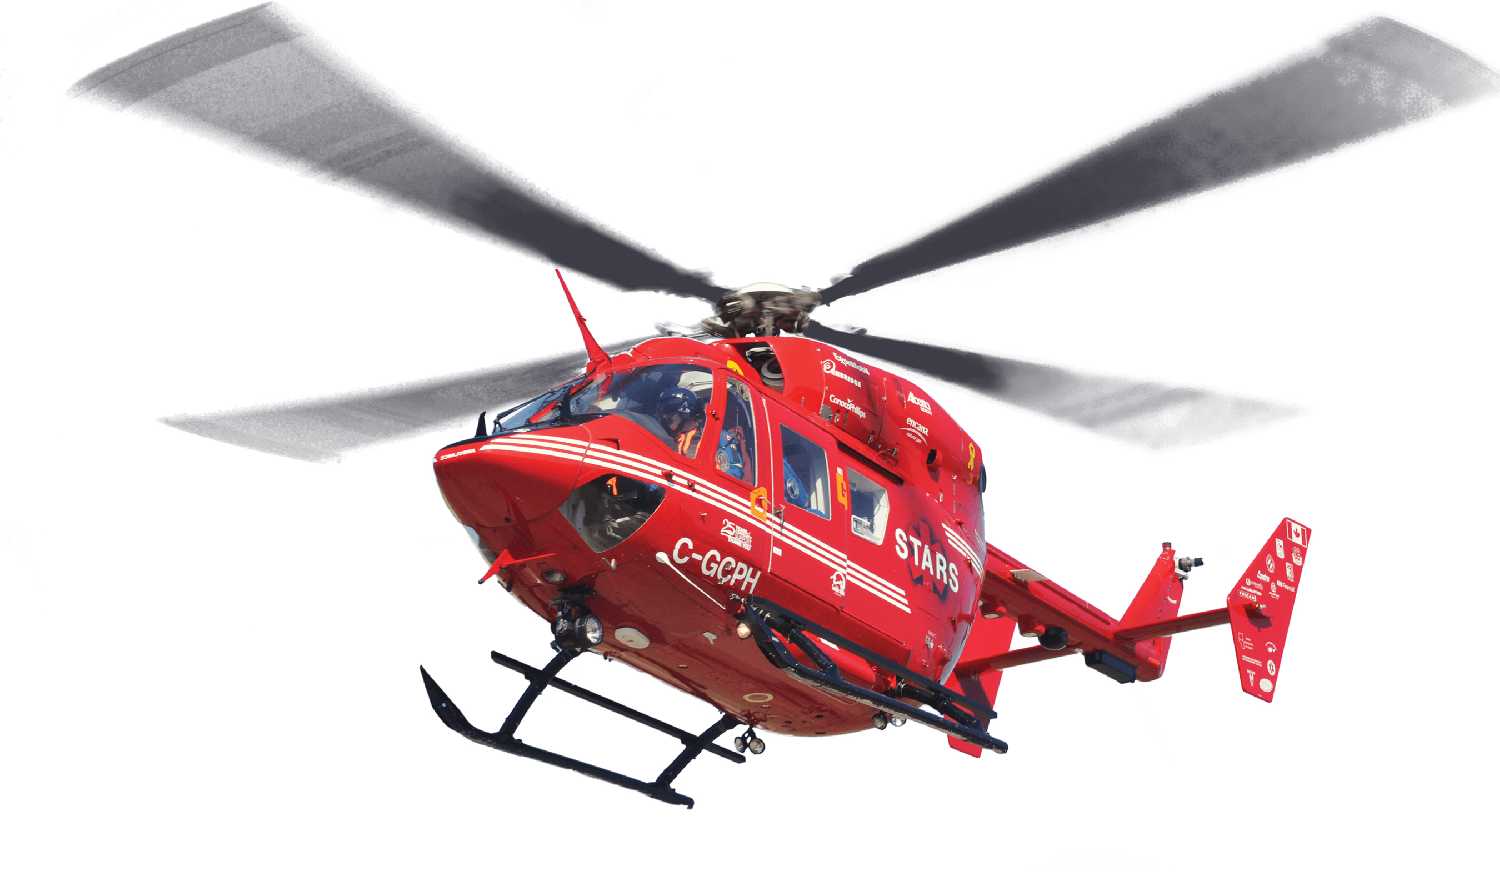  After receiving donations to fully fund the project from the community, the Redvers fire department will start the building of a helipad for STARS air ambulance as early of spring 2022. Above is one of the STARS air ambulance helicopters.